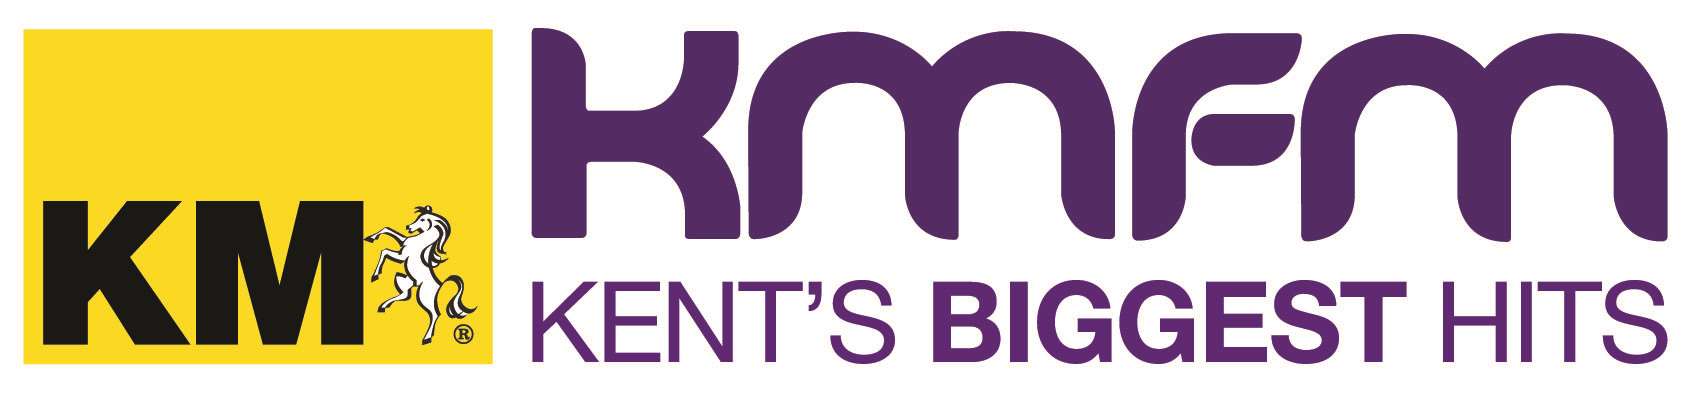 kmfm will be running the competition every day Monday to Friday